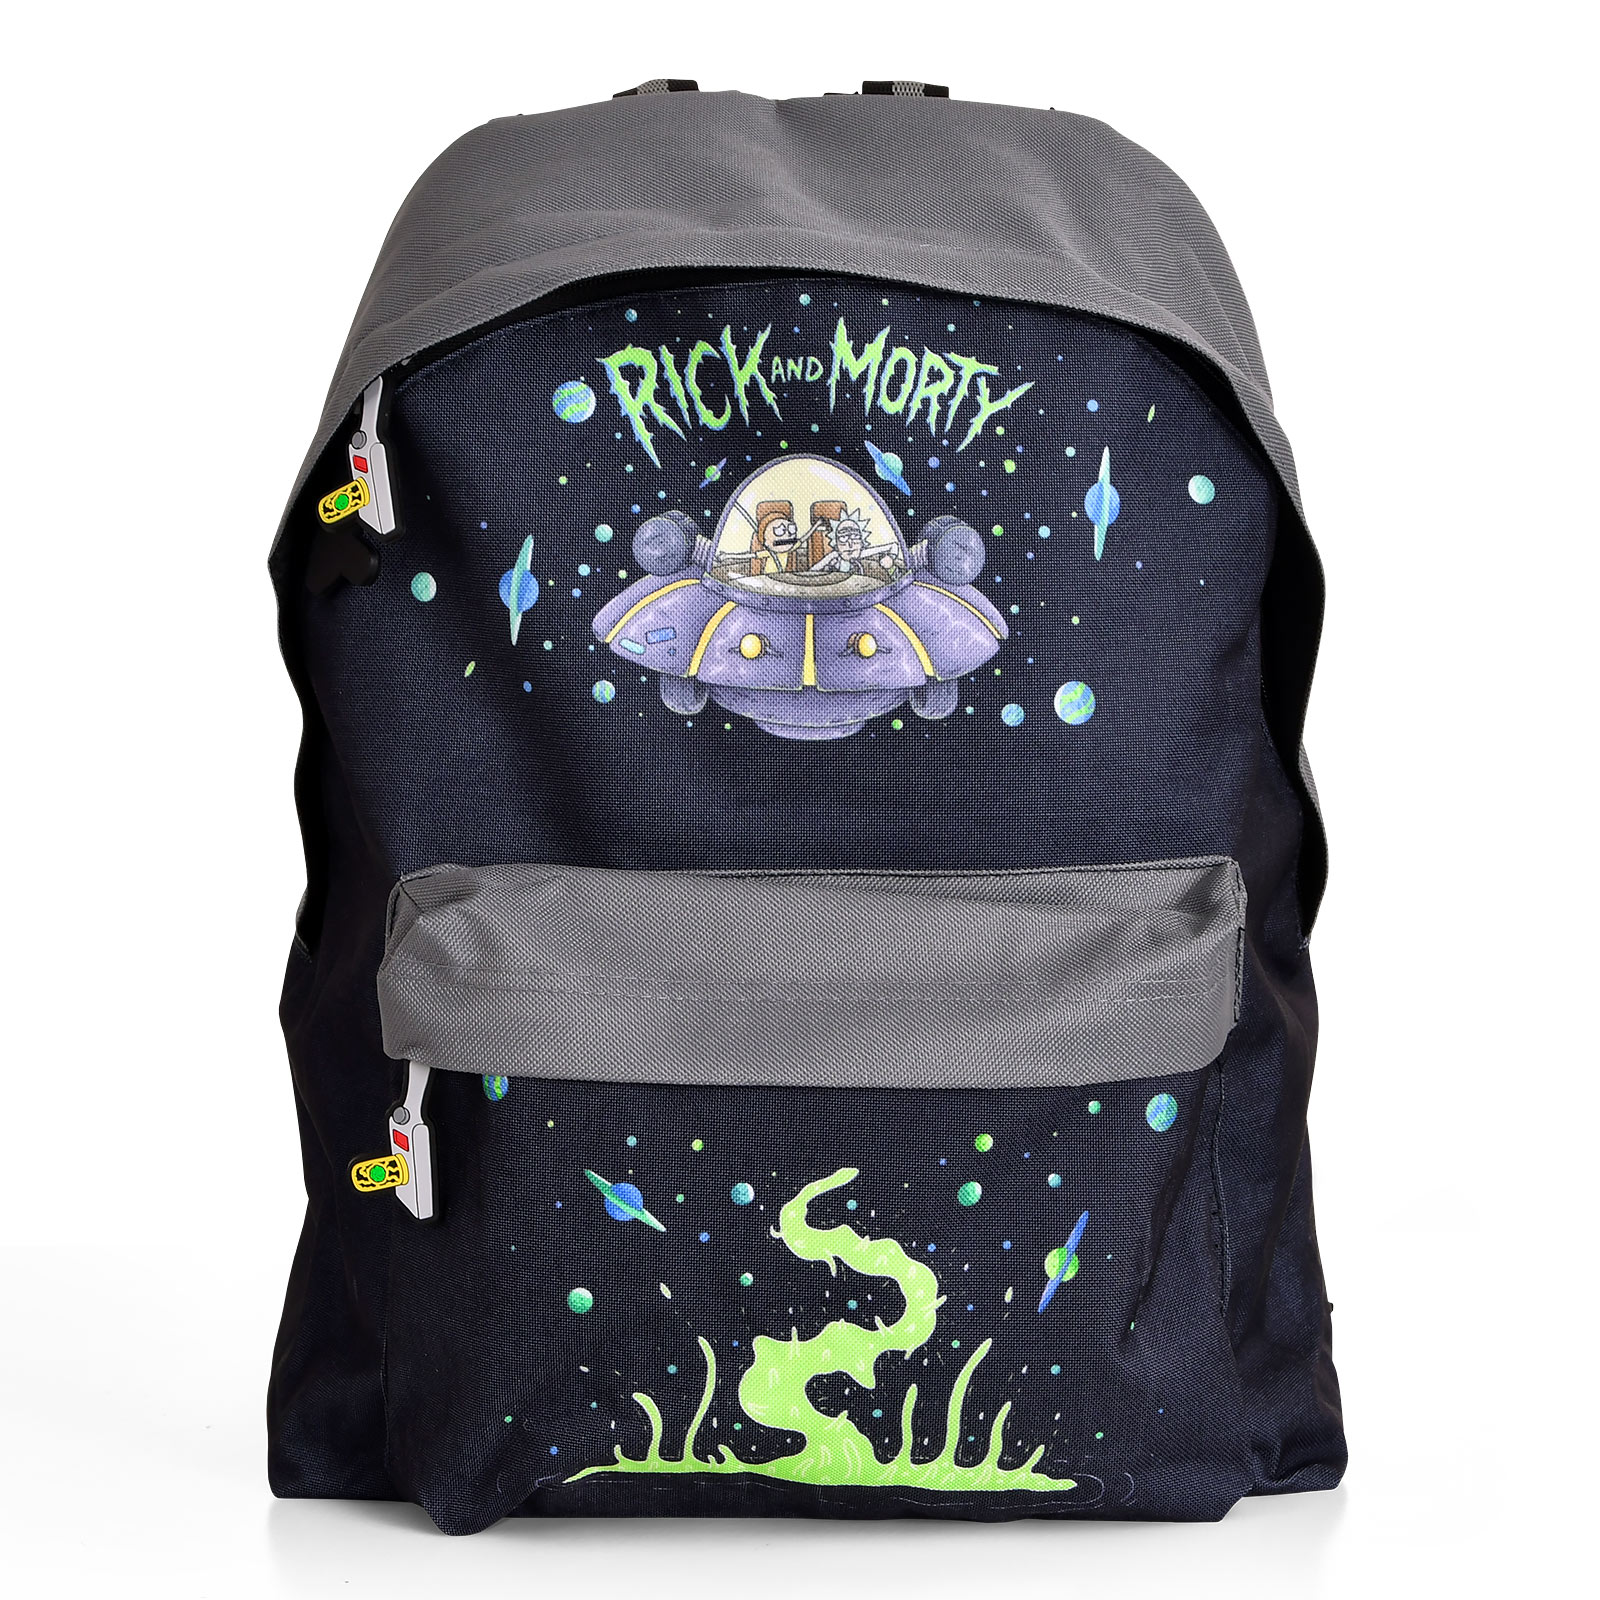 Rick and Morty - Space Cruiser Backpack